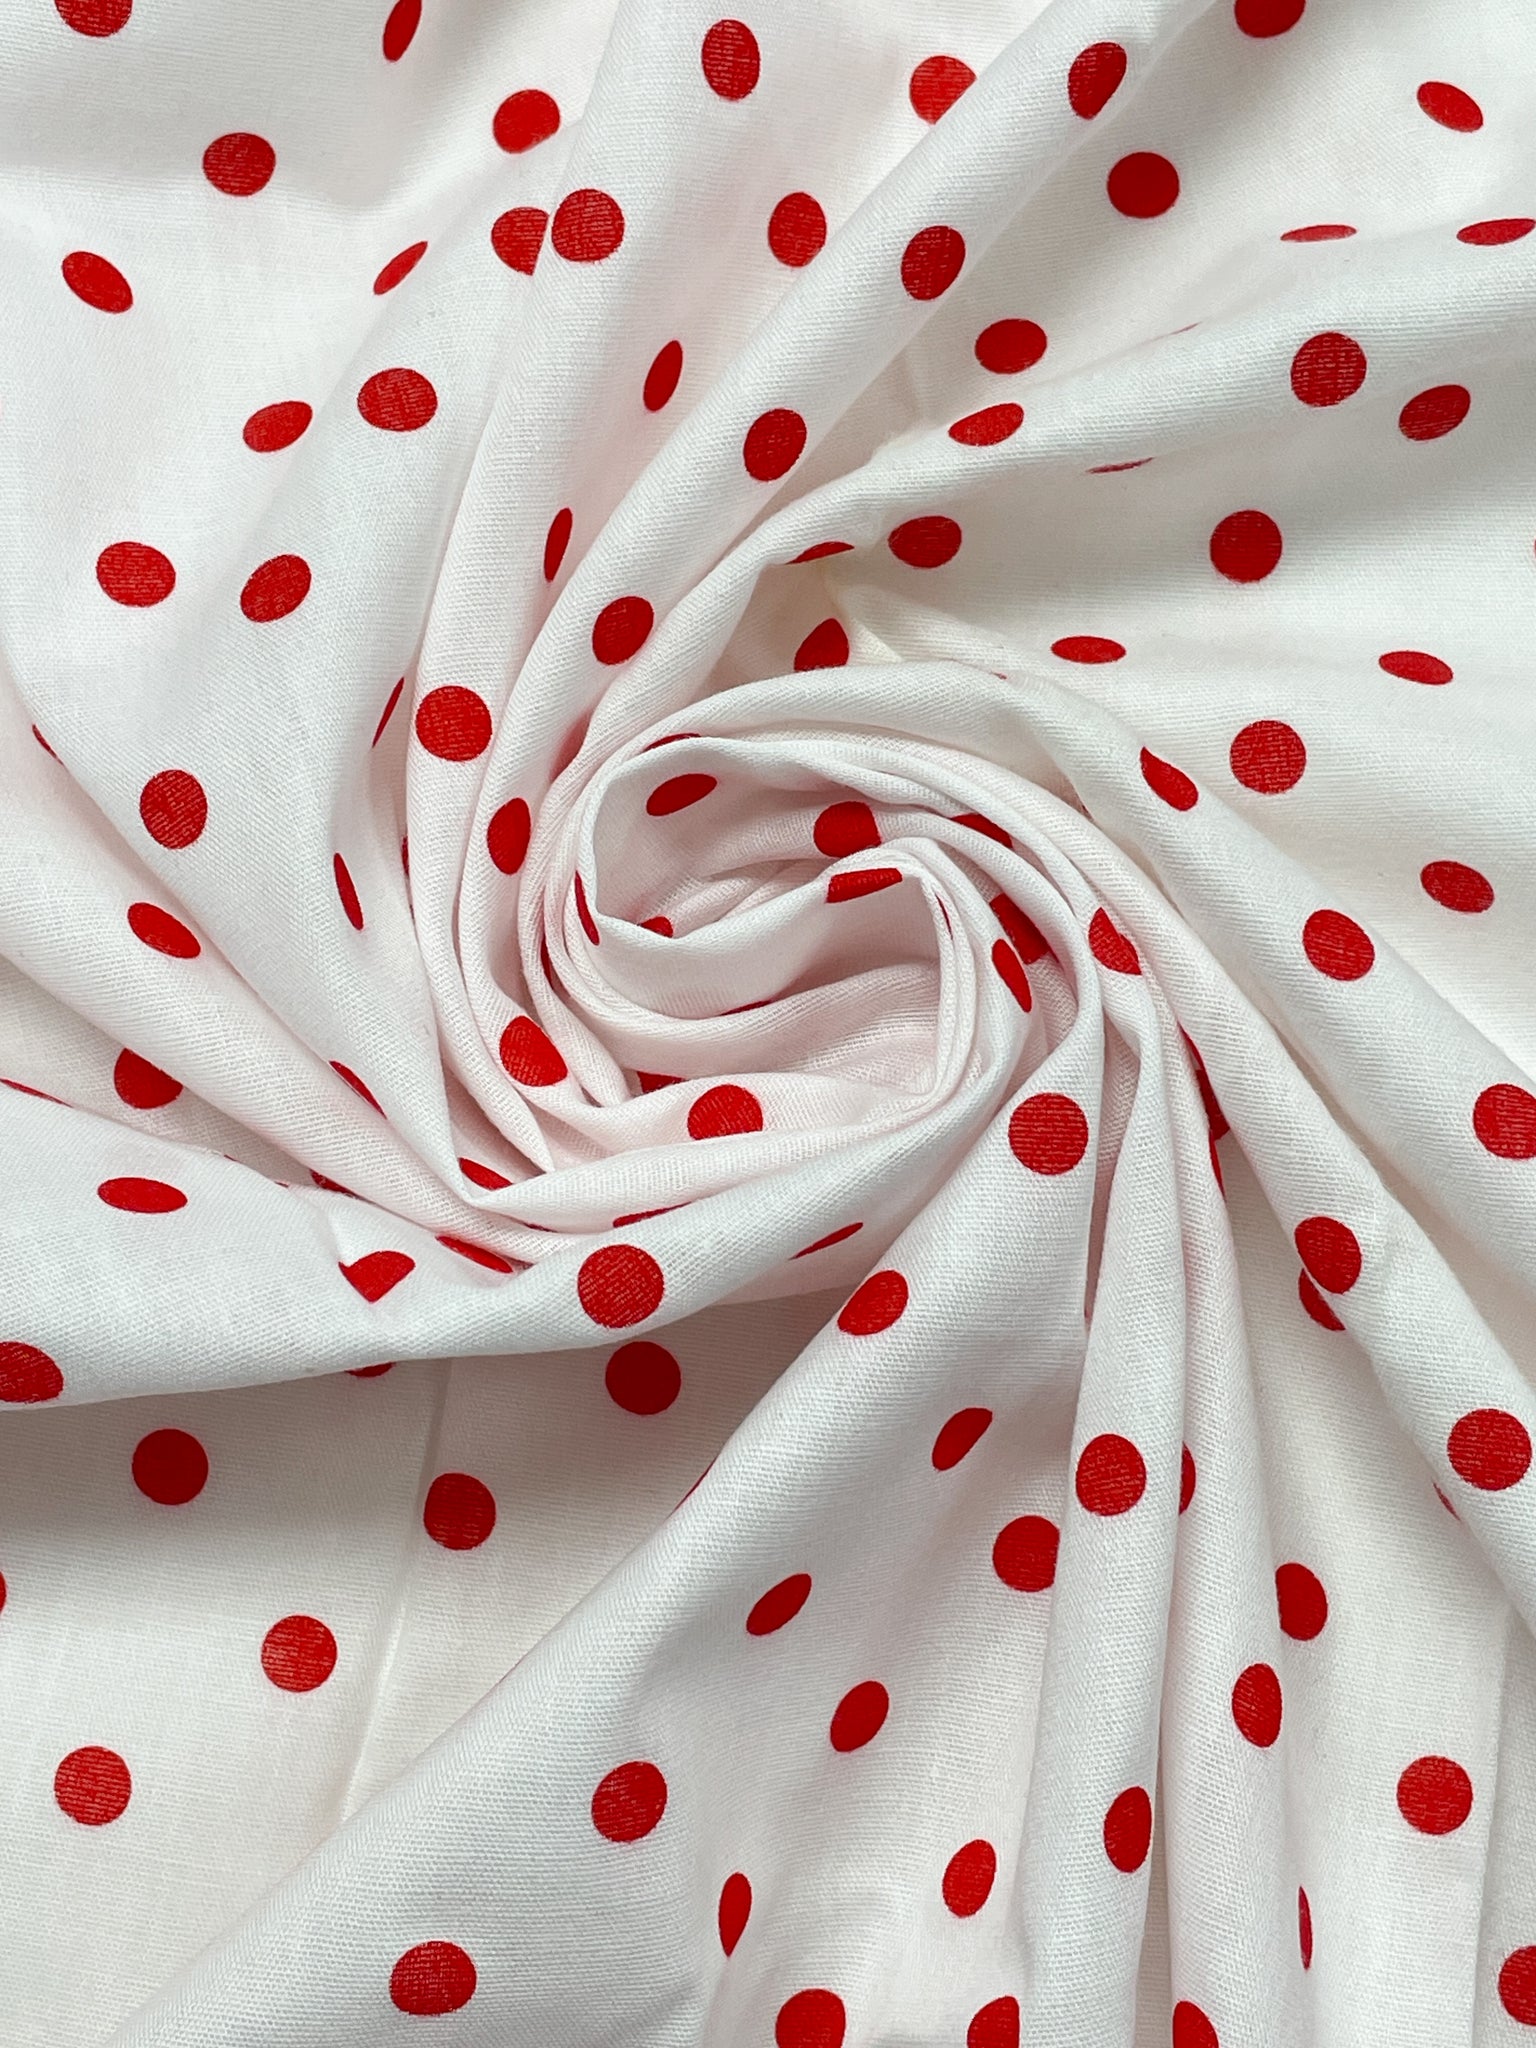 2 1/2 YD Cotton/Poly Batiste - White with Red Polka Dots